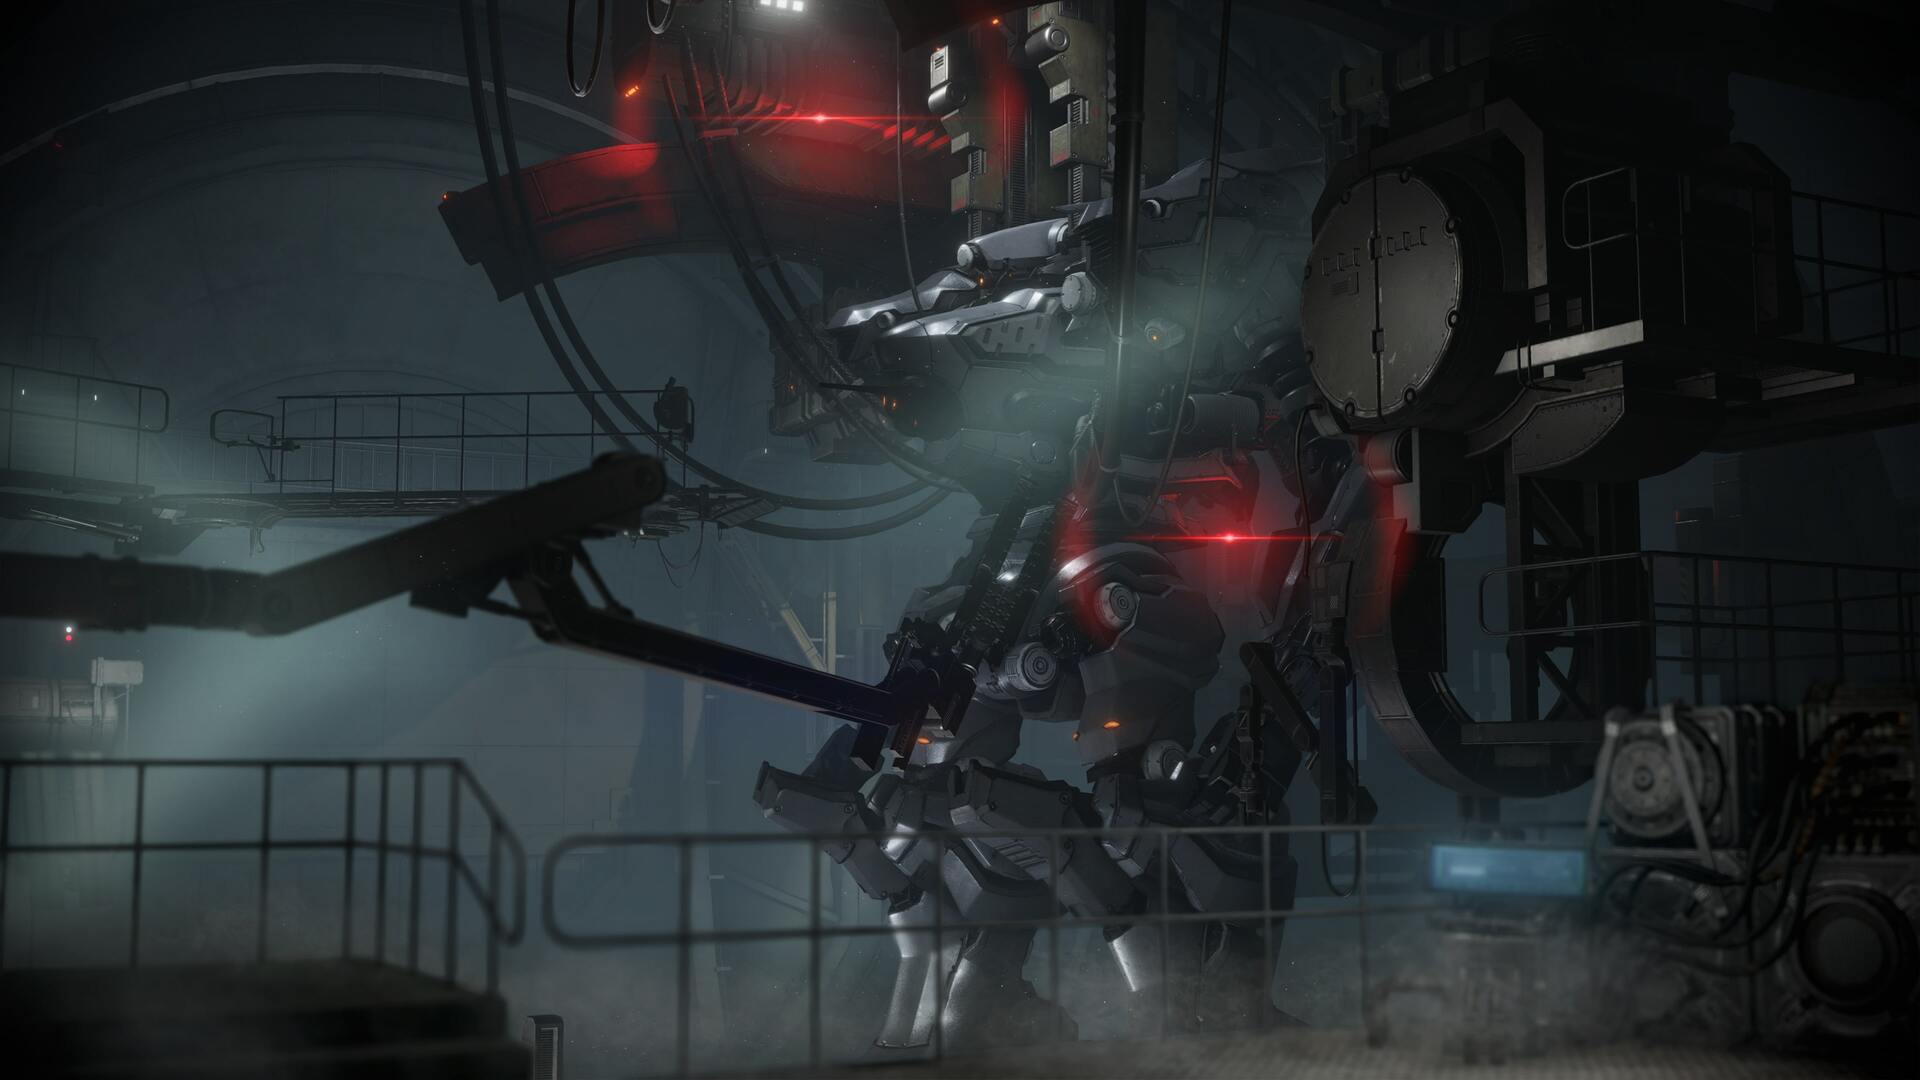 A mech in a hangar with ominous red lighting